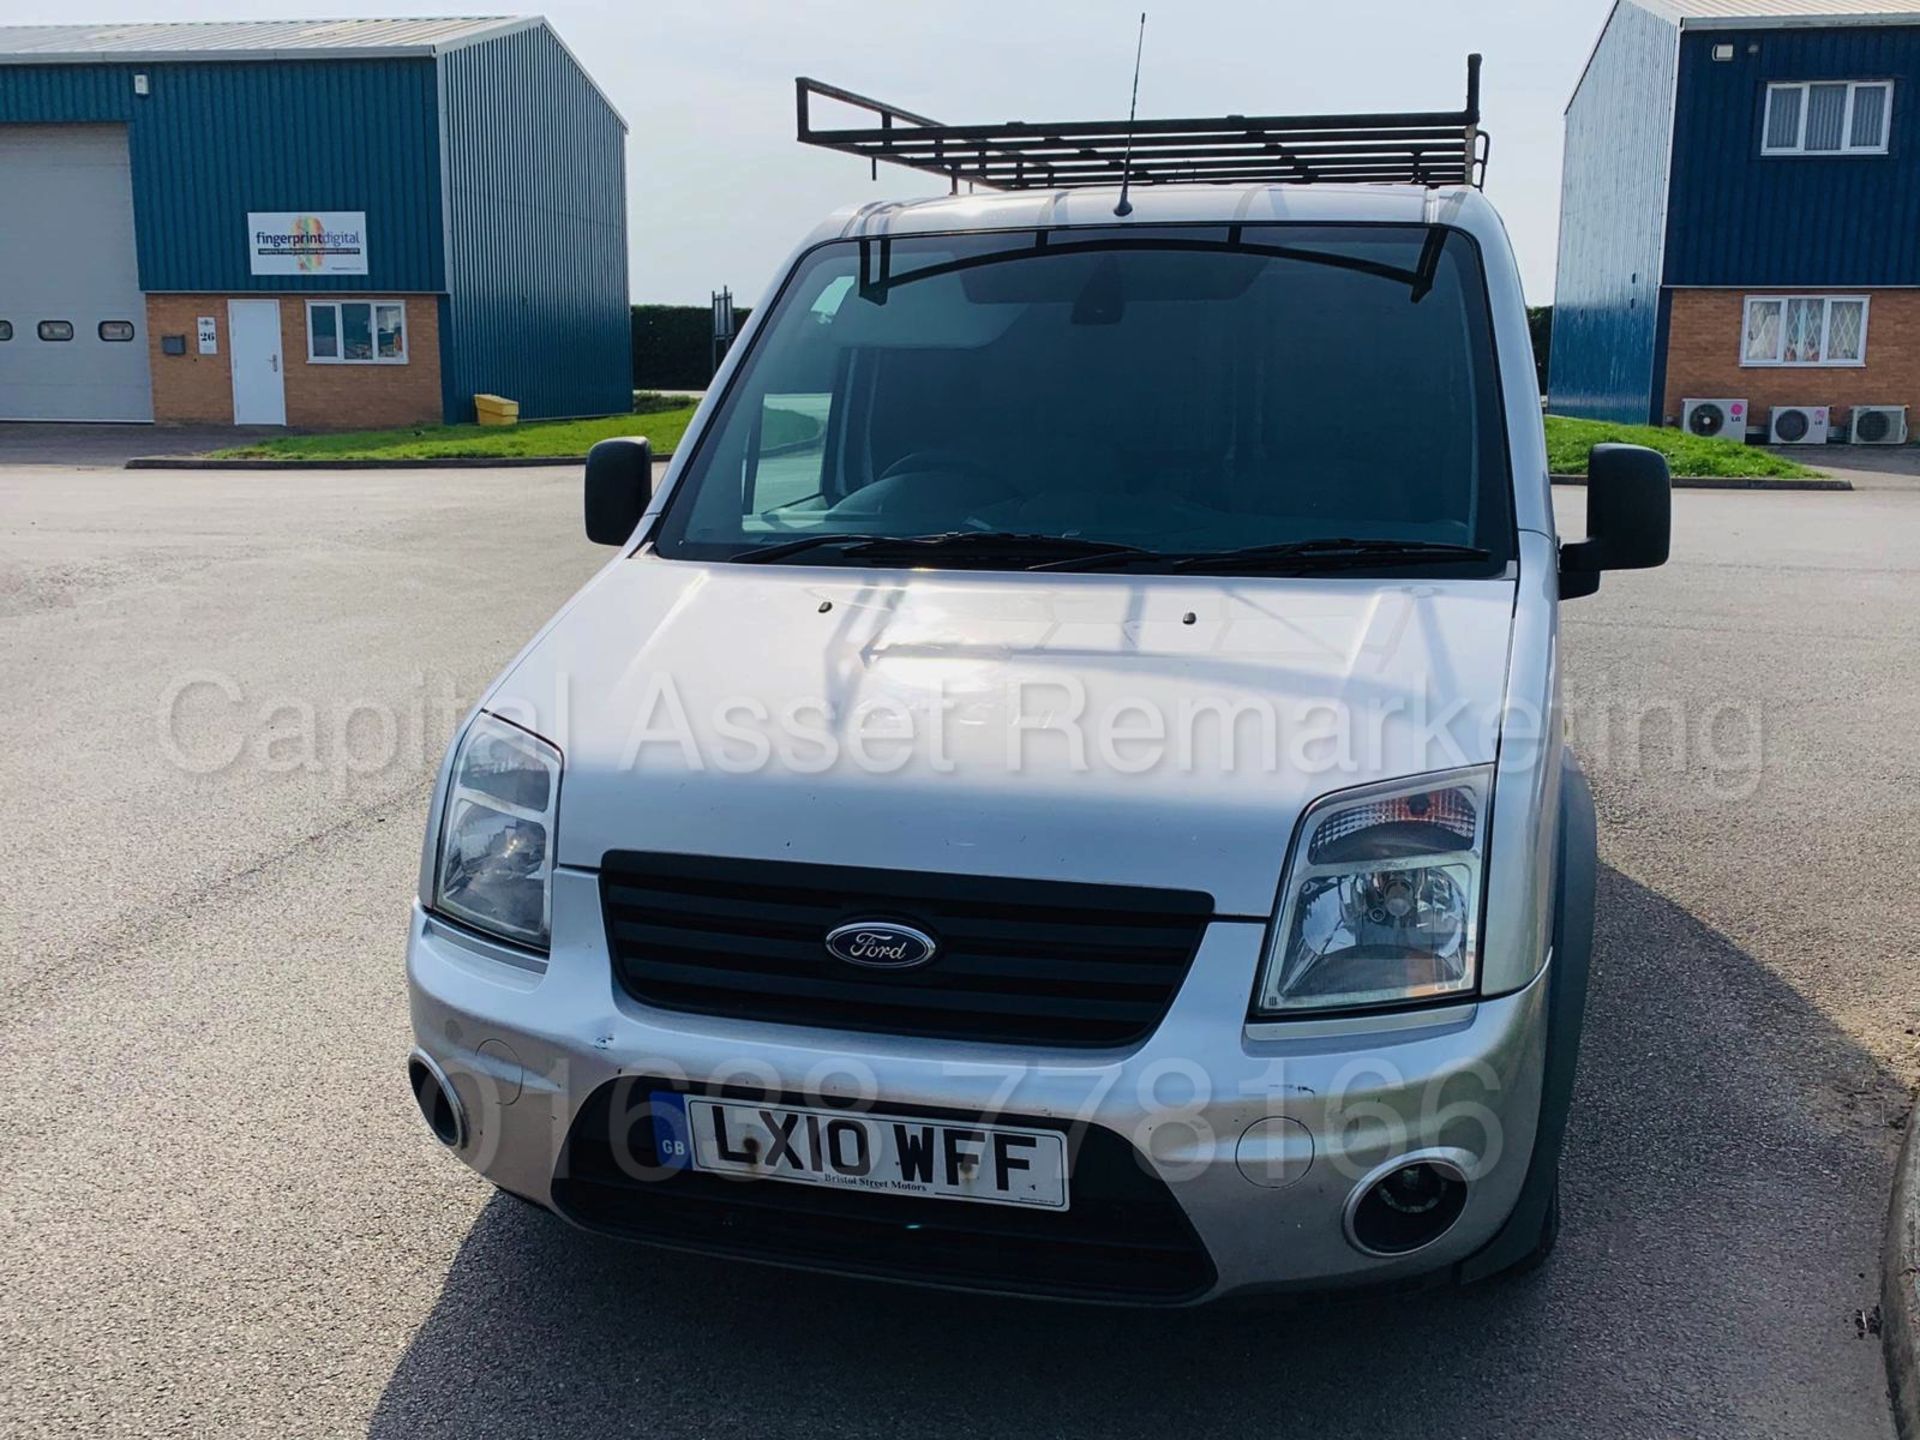 FORD TRANSIT CONNECT *TREND EDITION* (2010 - NEW MODEL) '1.8 TDCI - 90 BHP' **AIR CON** - Image 2 of 26